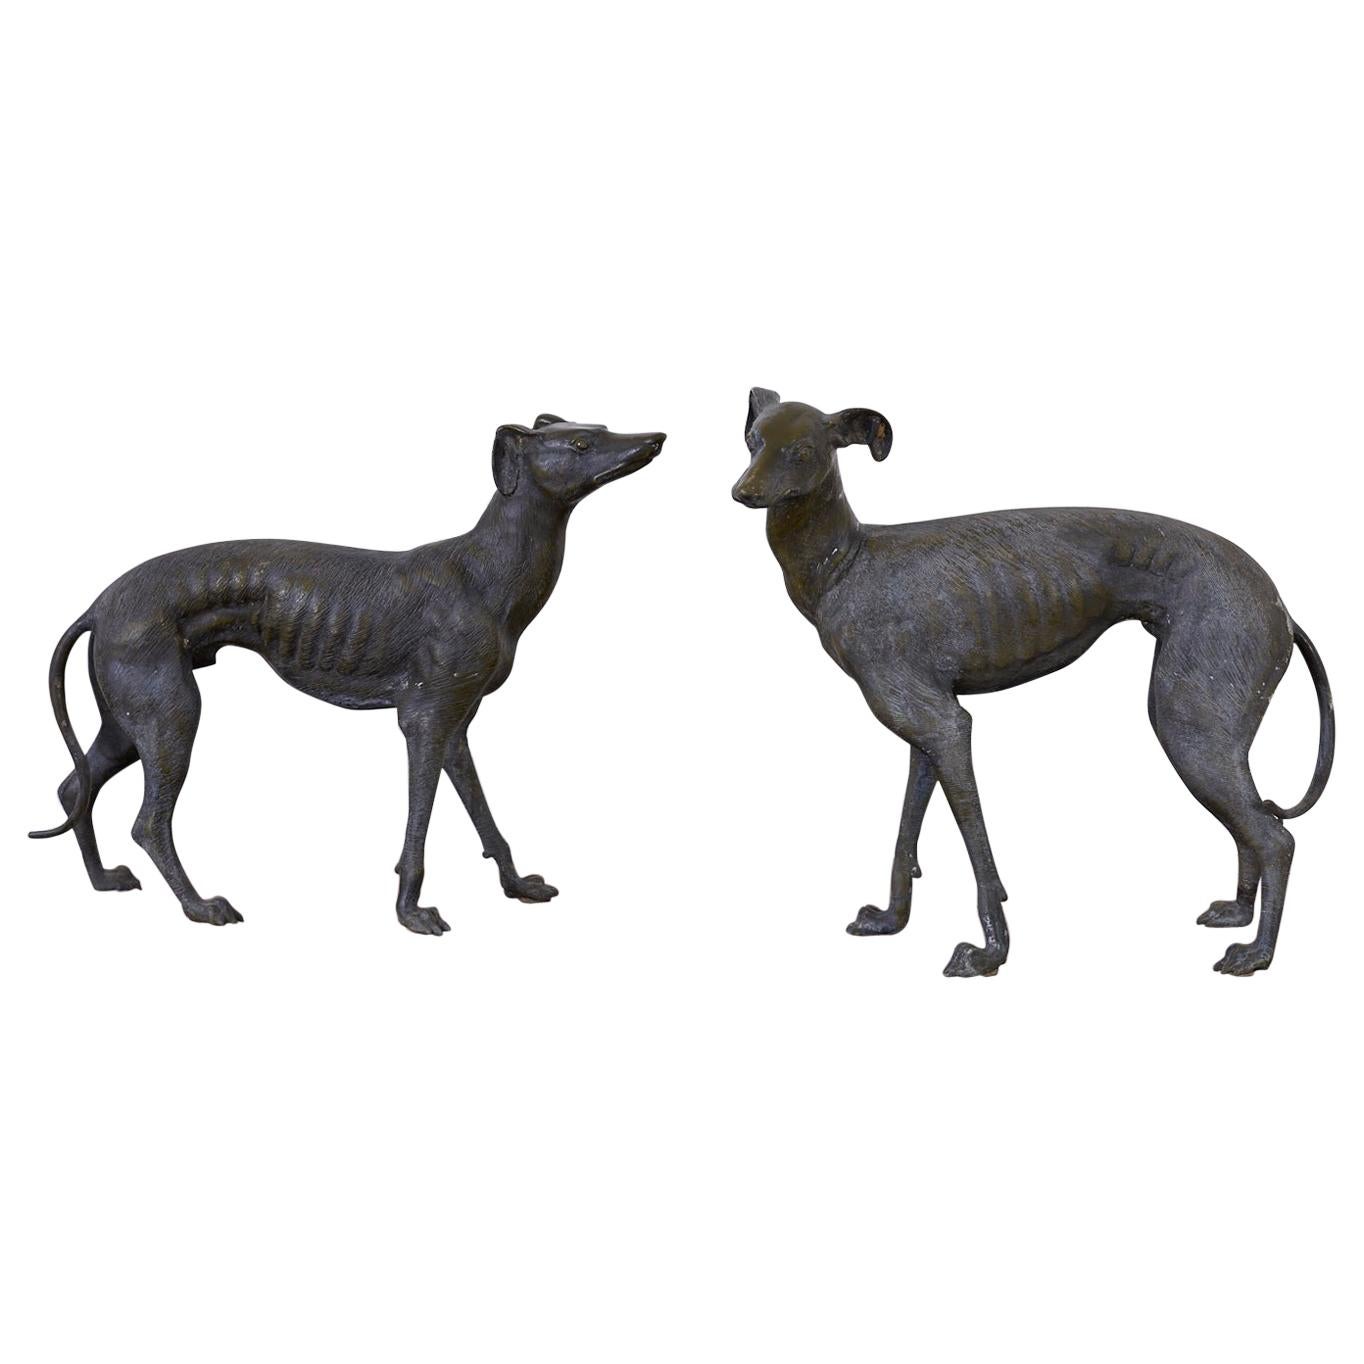 Pair of Bronze Whippets or Greyhound Dog Sculptures